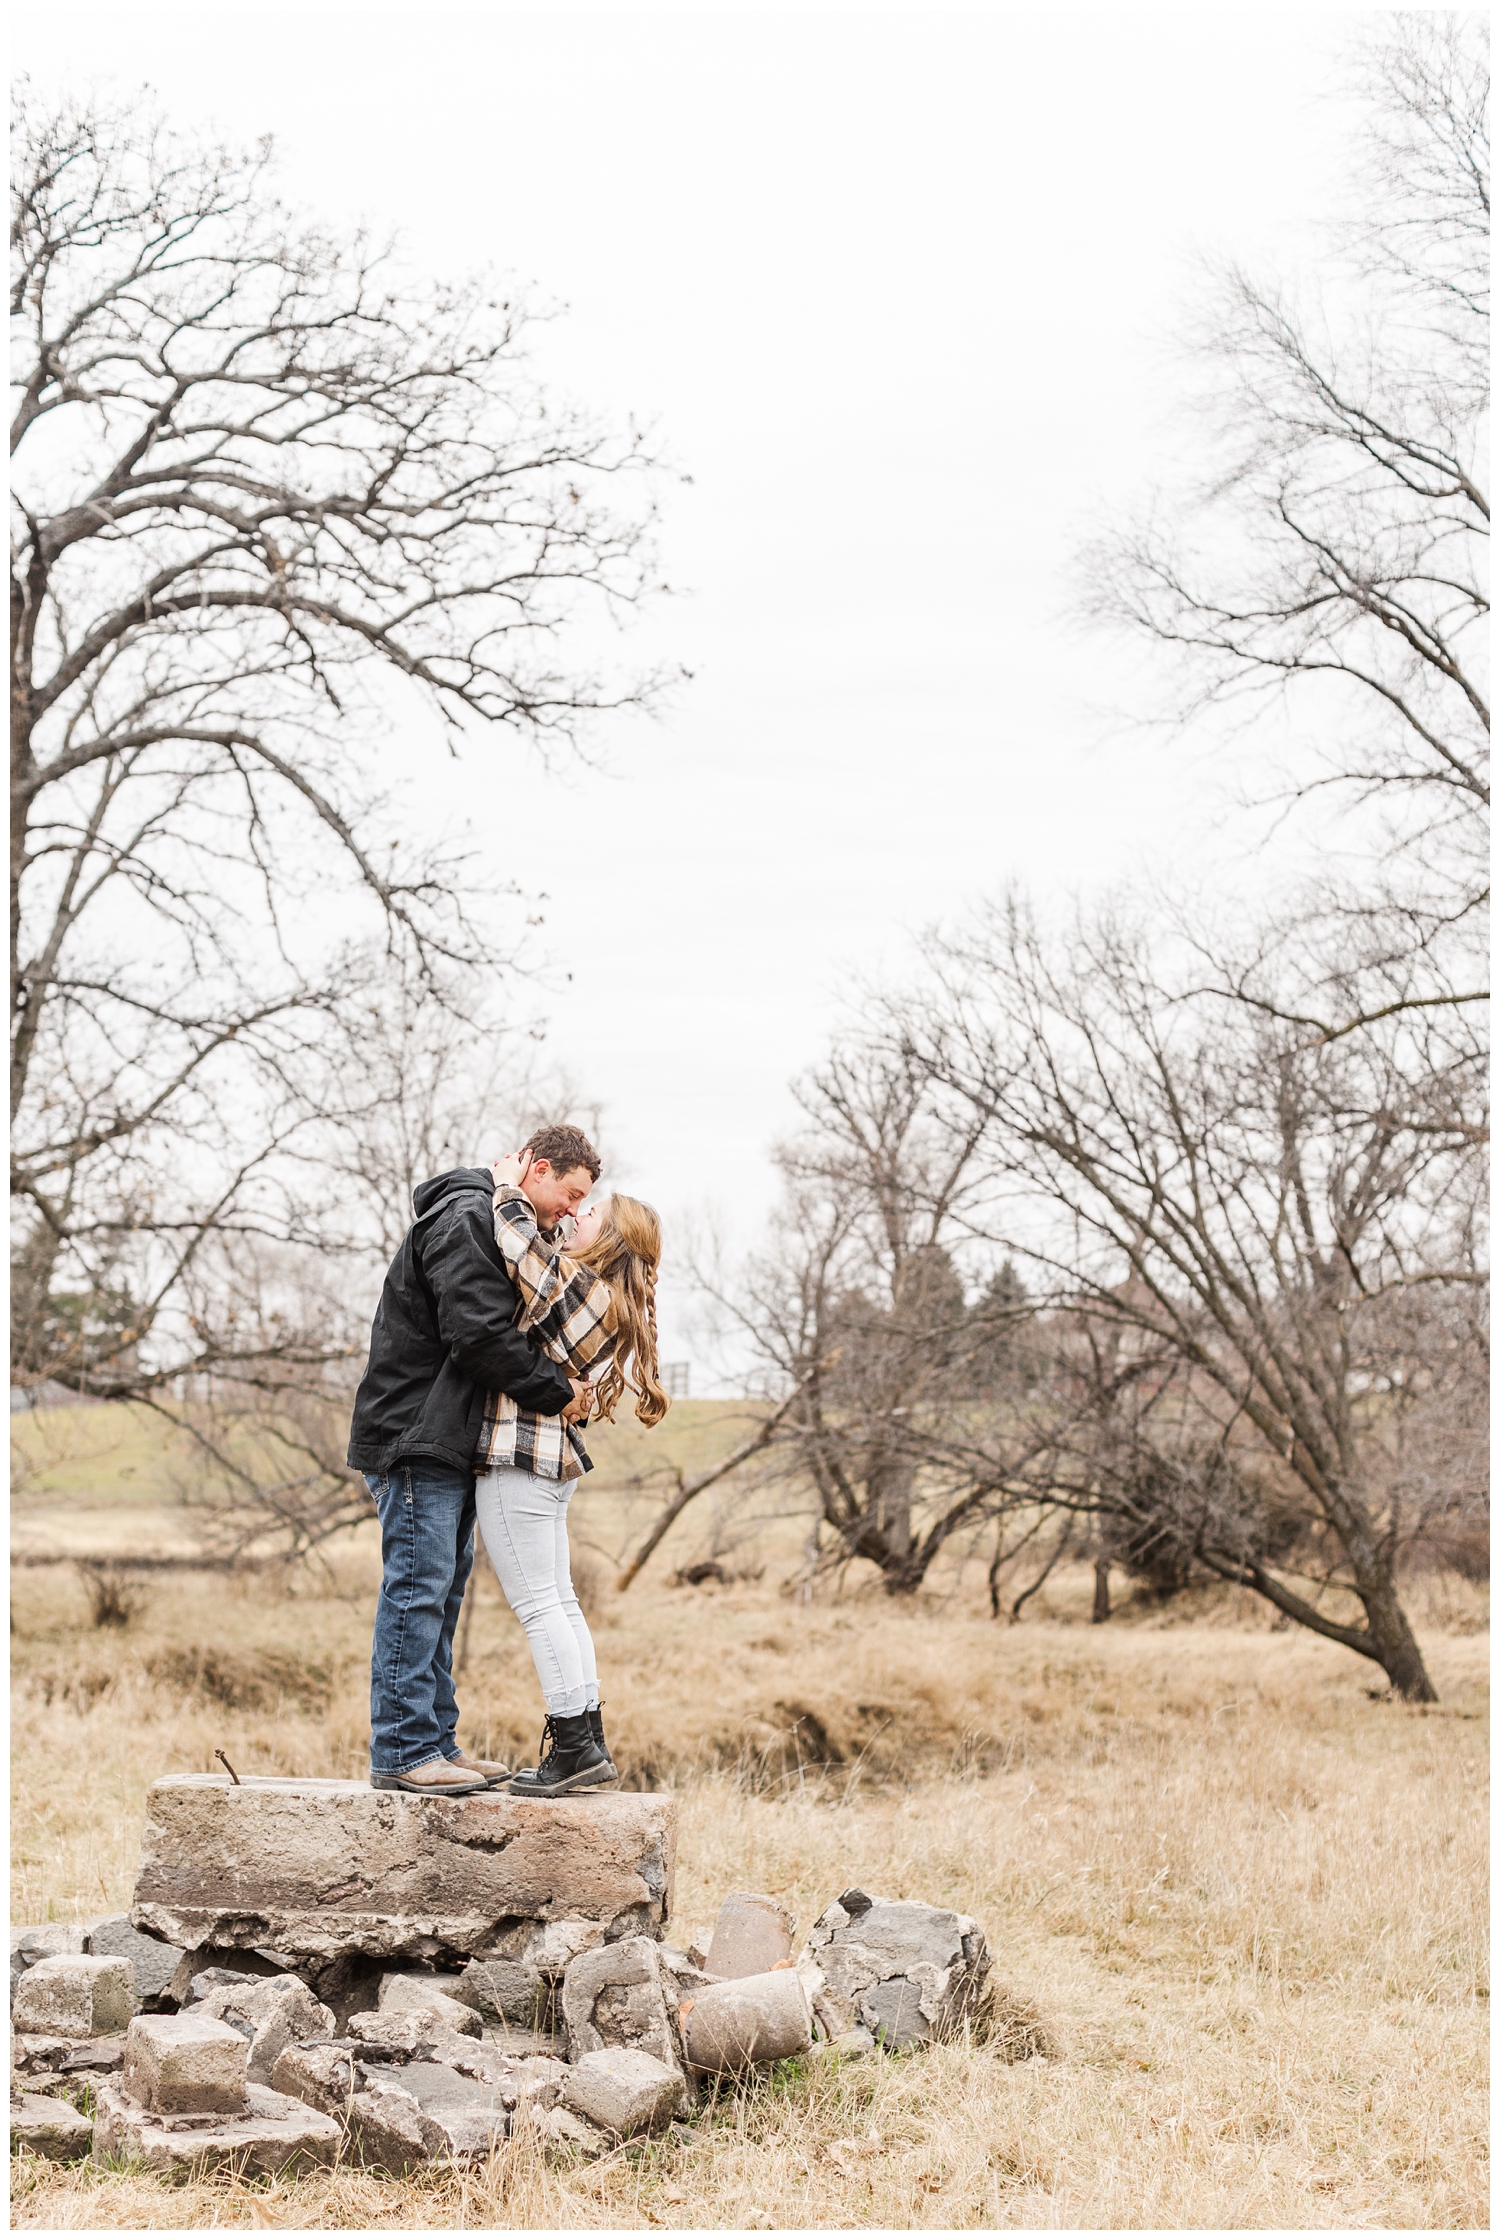 Travis and Abi embrace as they stand on some concrete blocks in a grassy filed in Iowa in the middle of winter | CB Studio